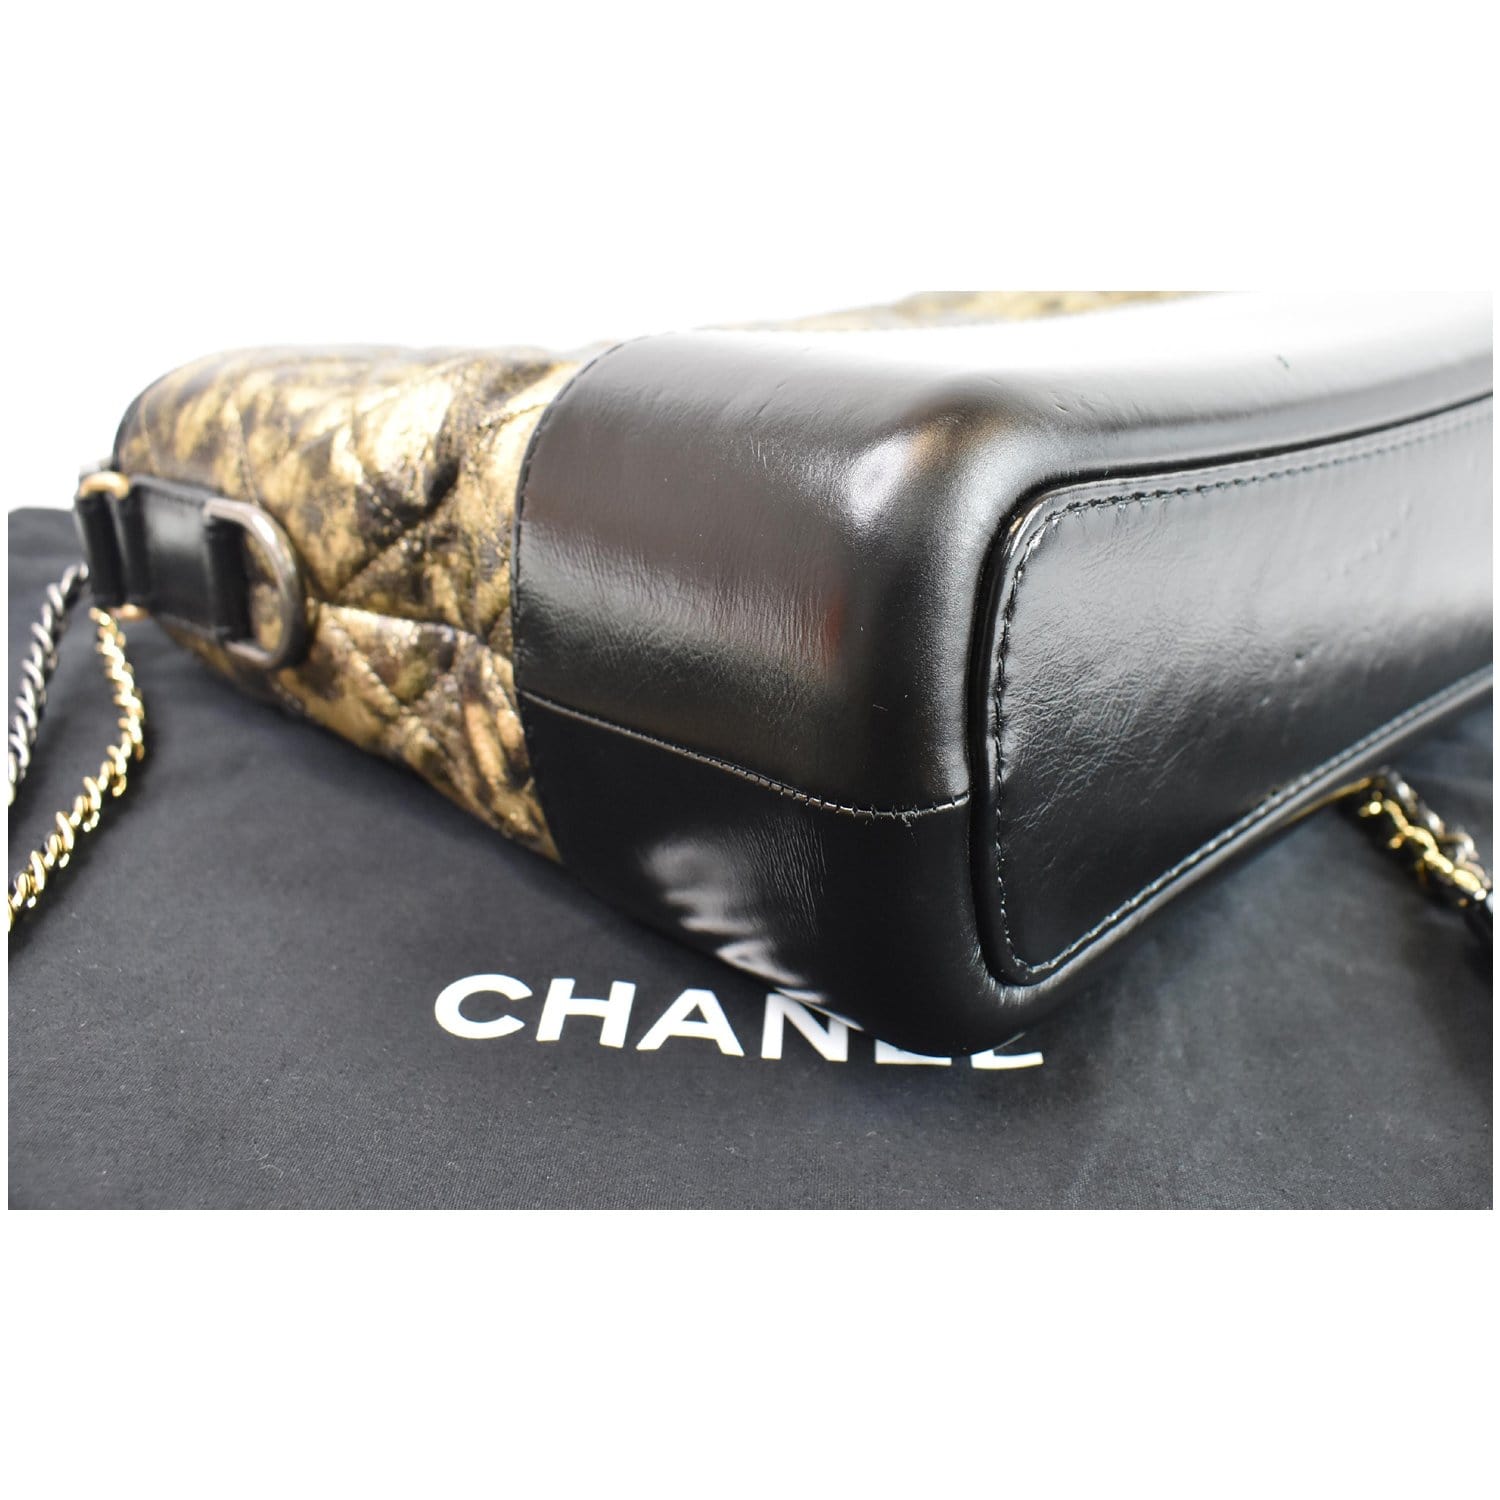 Chanel Gabrielle Classic Pouch-Black Calfskin With Gold Hardware - NEW